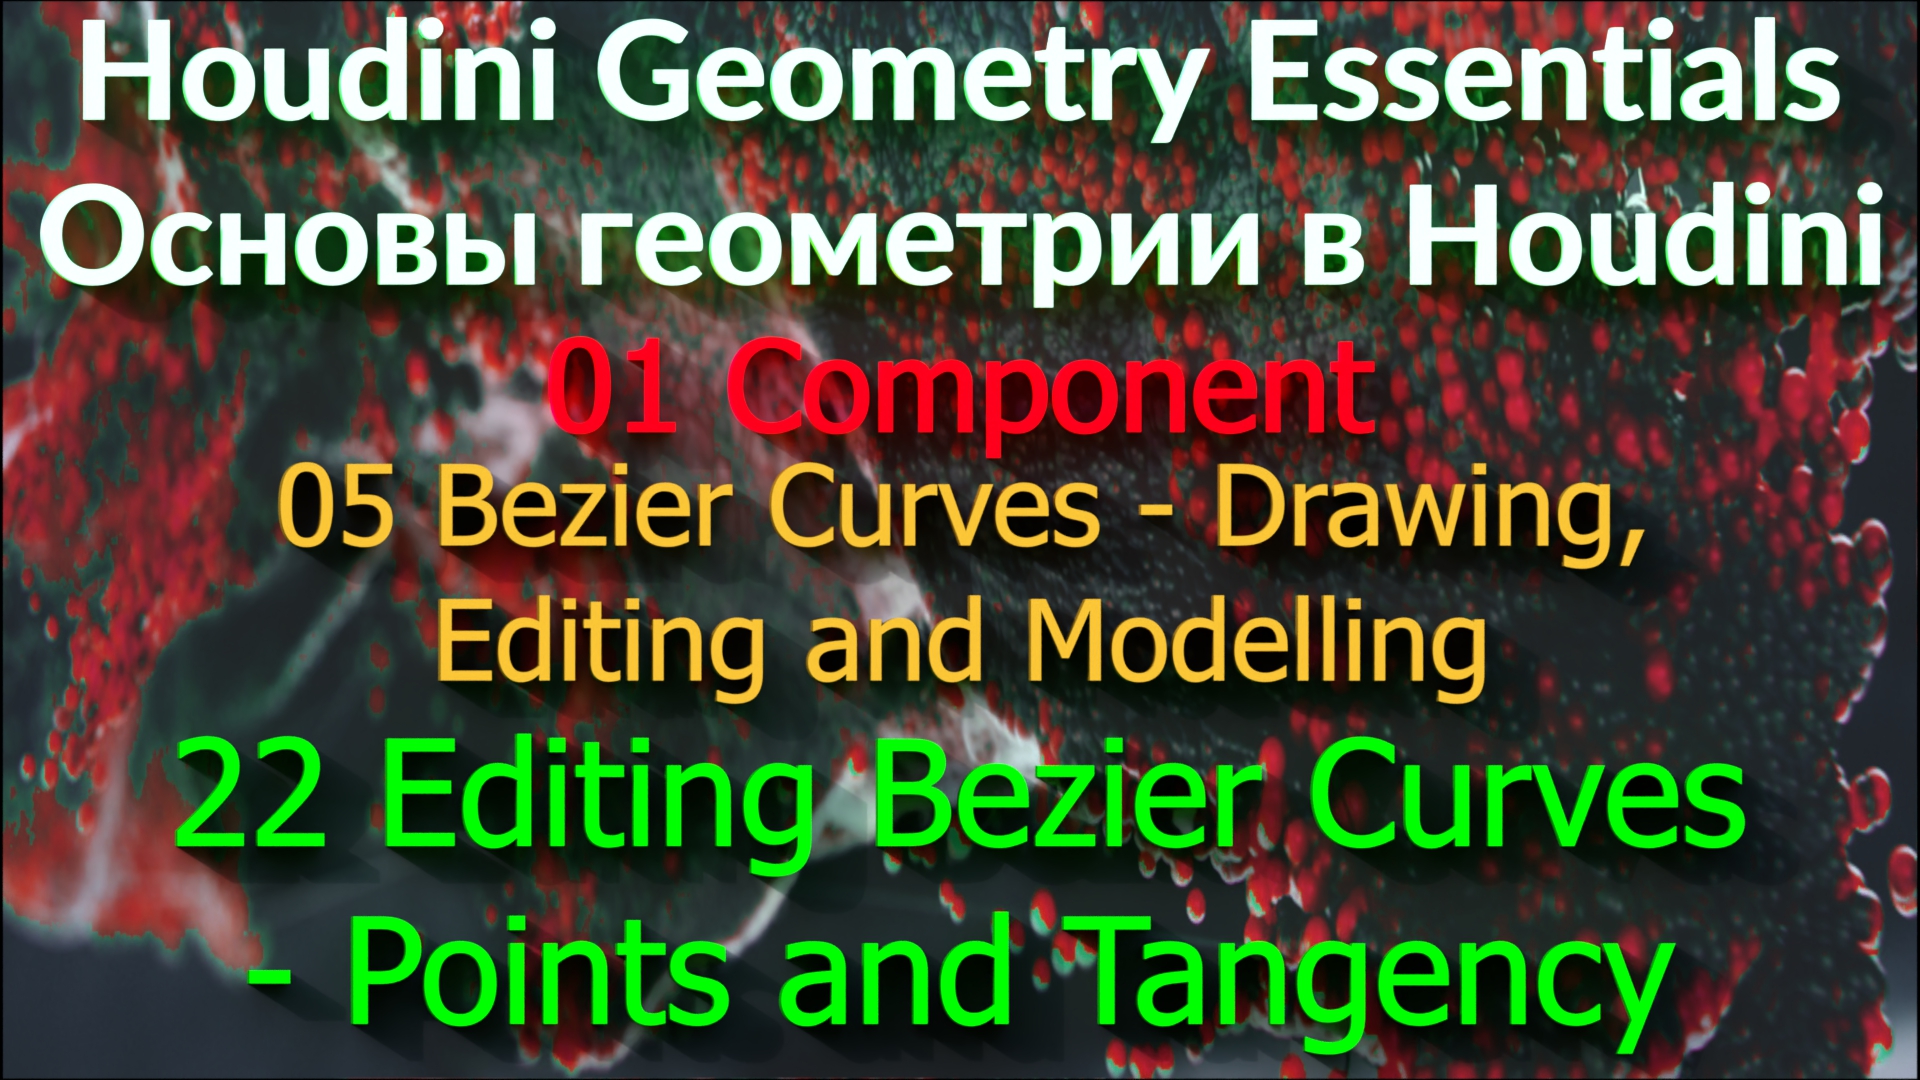 01_05_22. Editing Bezier Curves - Points and Tangency